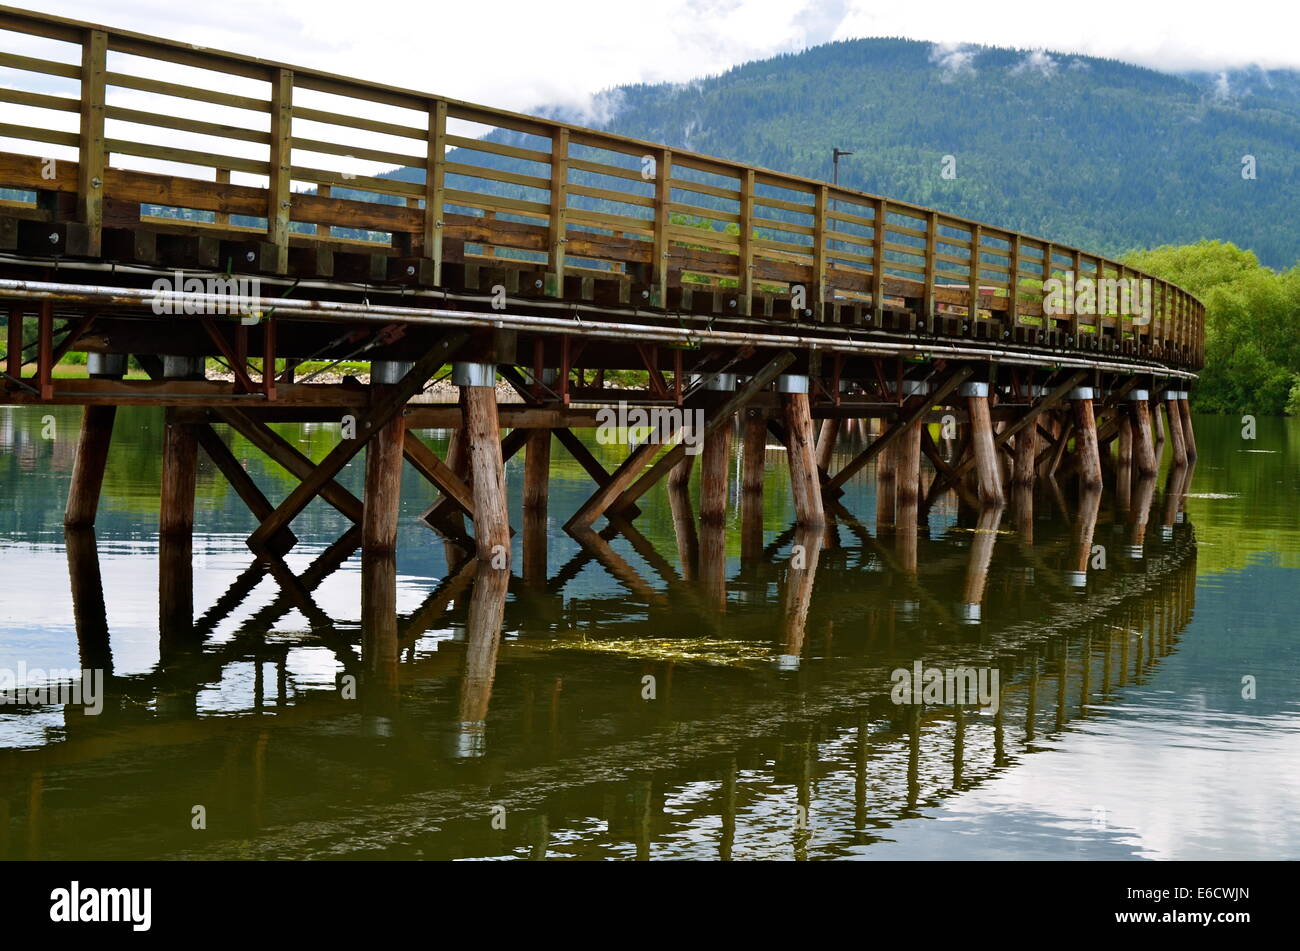 The longest wooden fresh water pier in North America.  Located in Salmon Arm, British Columbia, Canada. Stock Photo